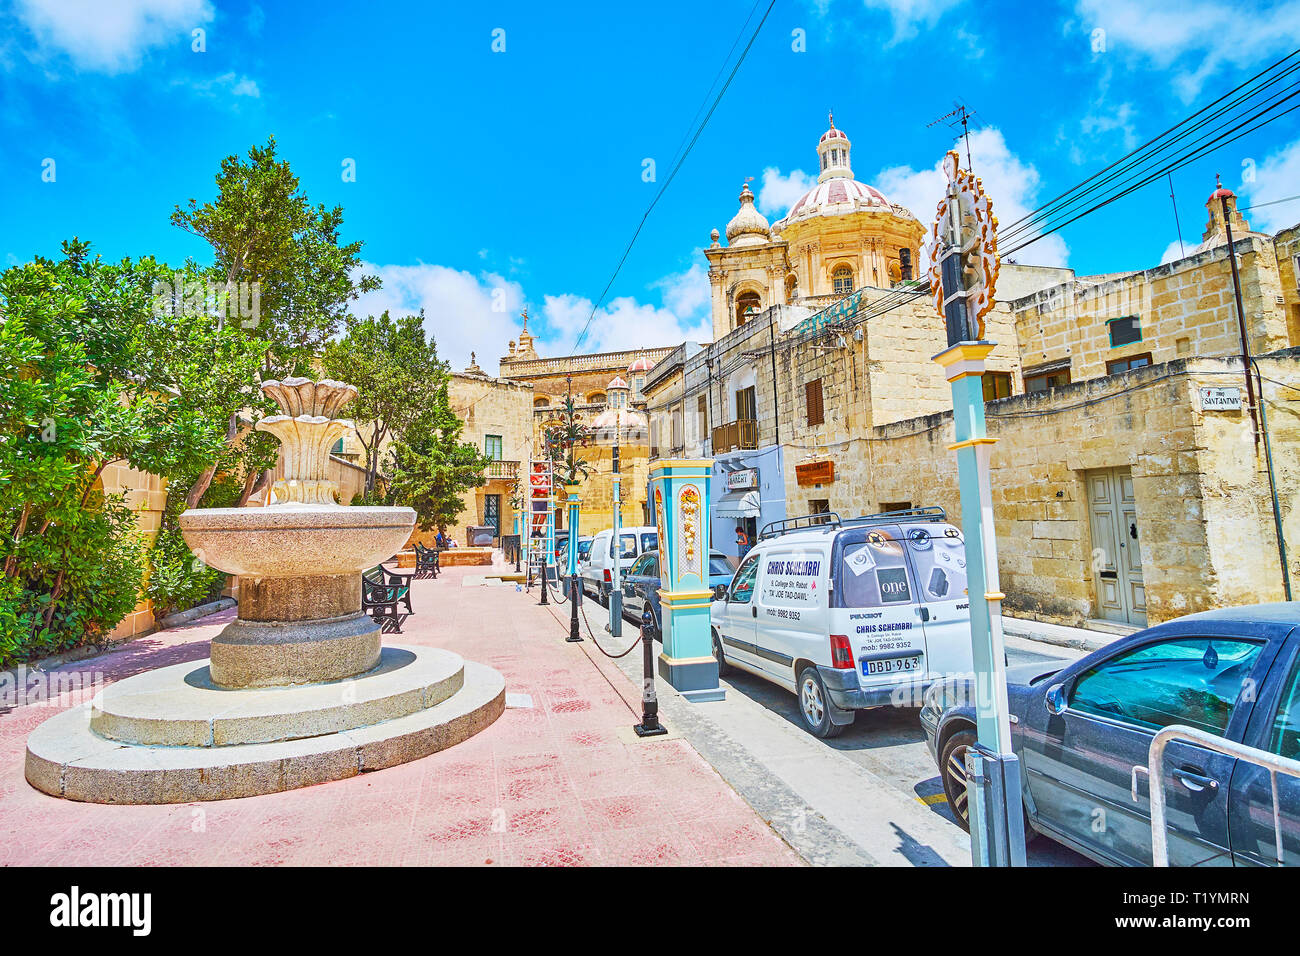 RABAT, MALTA - JUNE 16, 2018: The old stone fountain in tiny garden in College street with a view on the dome of St Paul Church, on June 16 in Rabat. Stock Photo